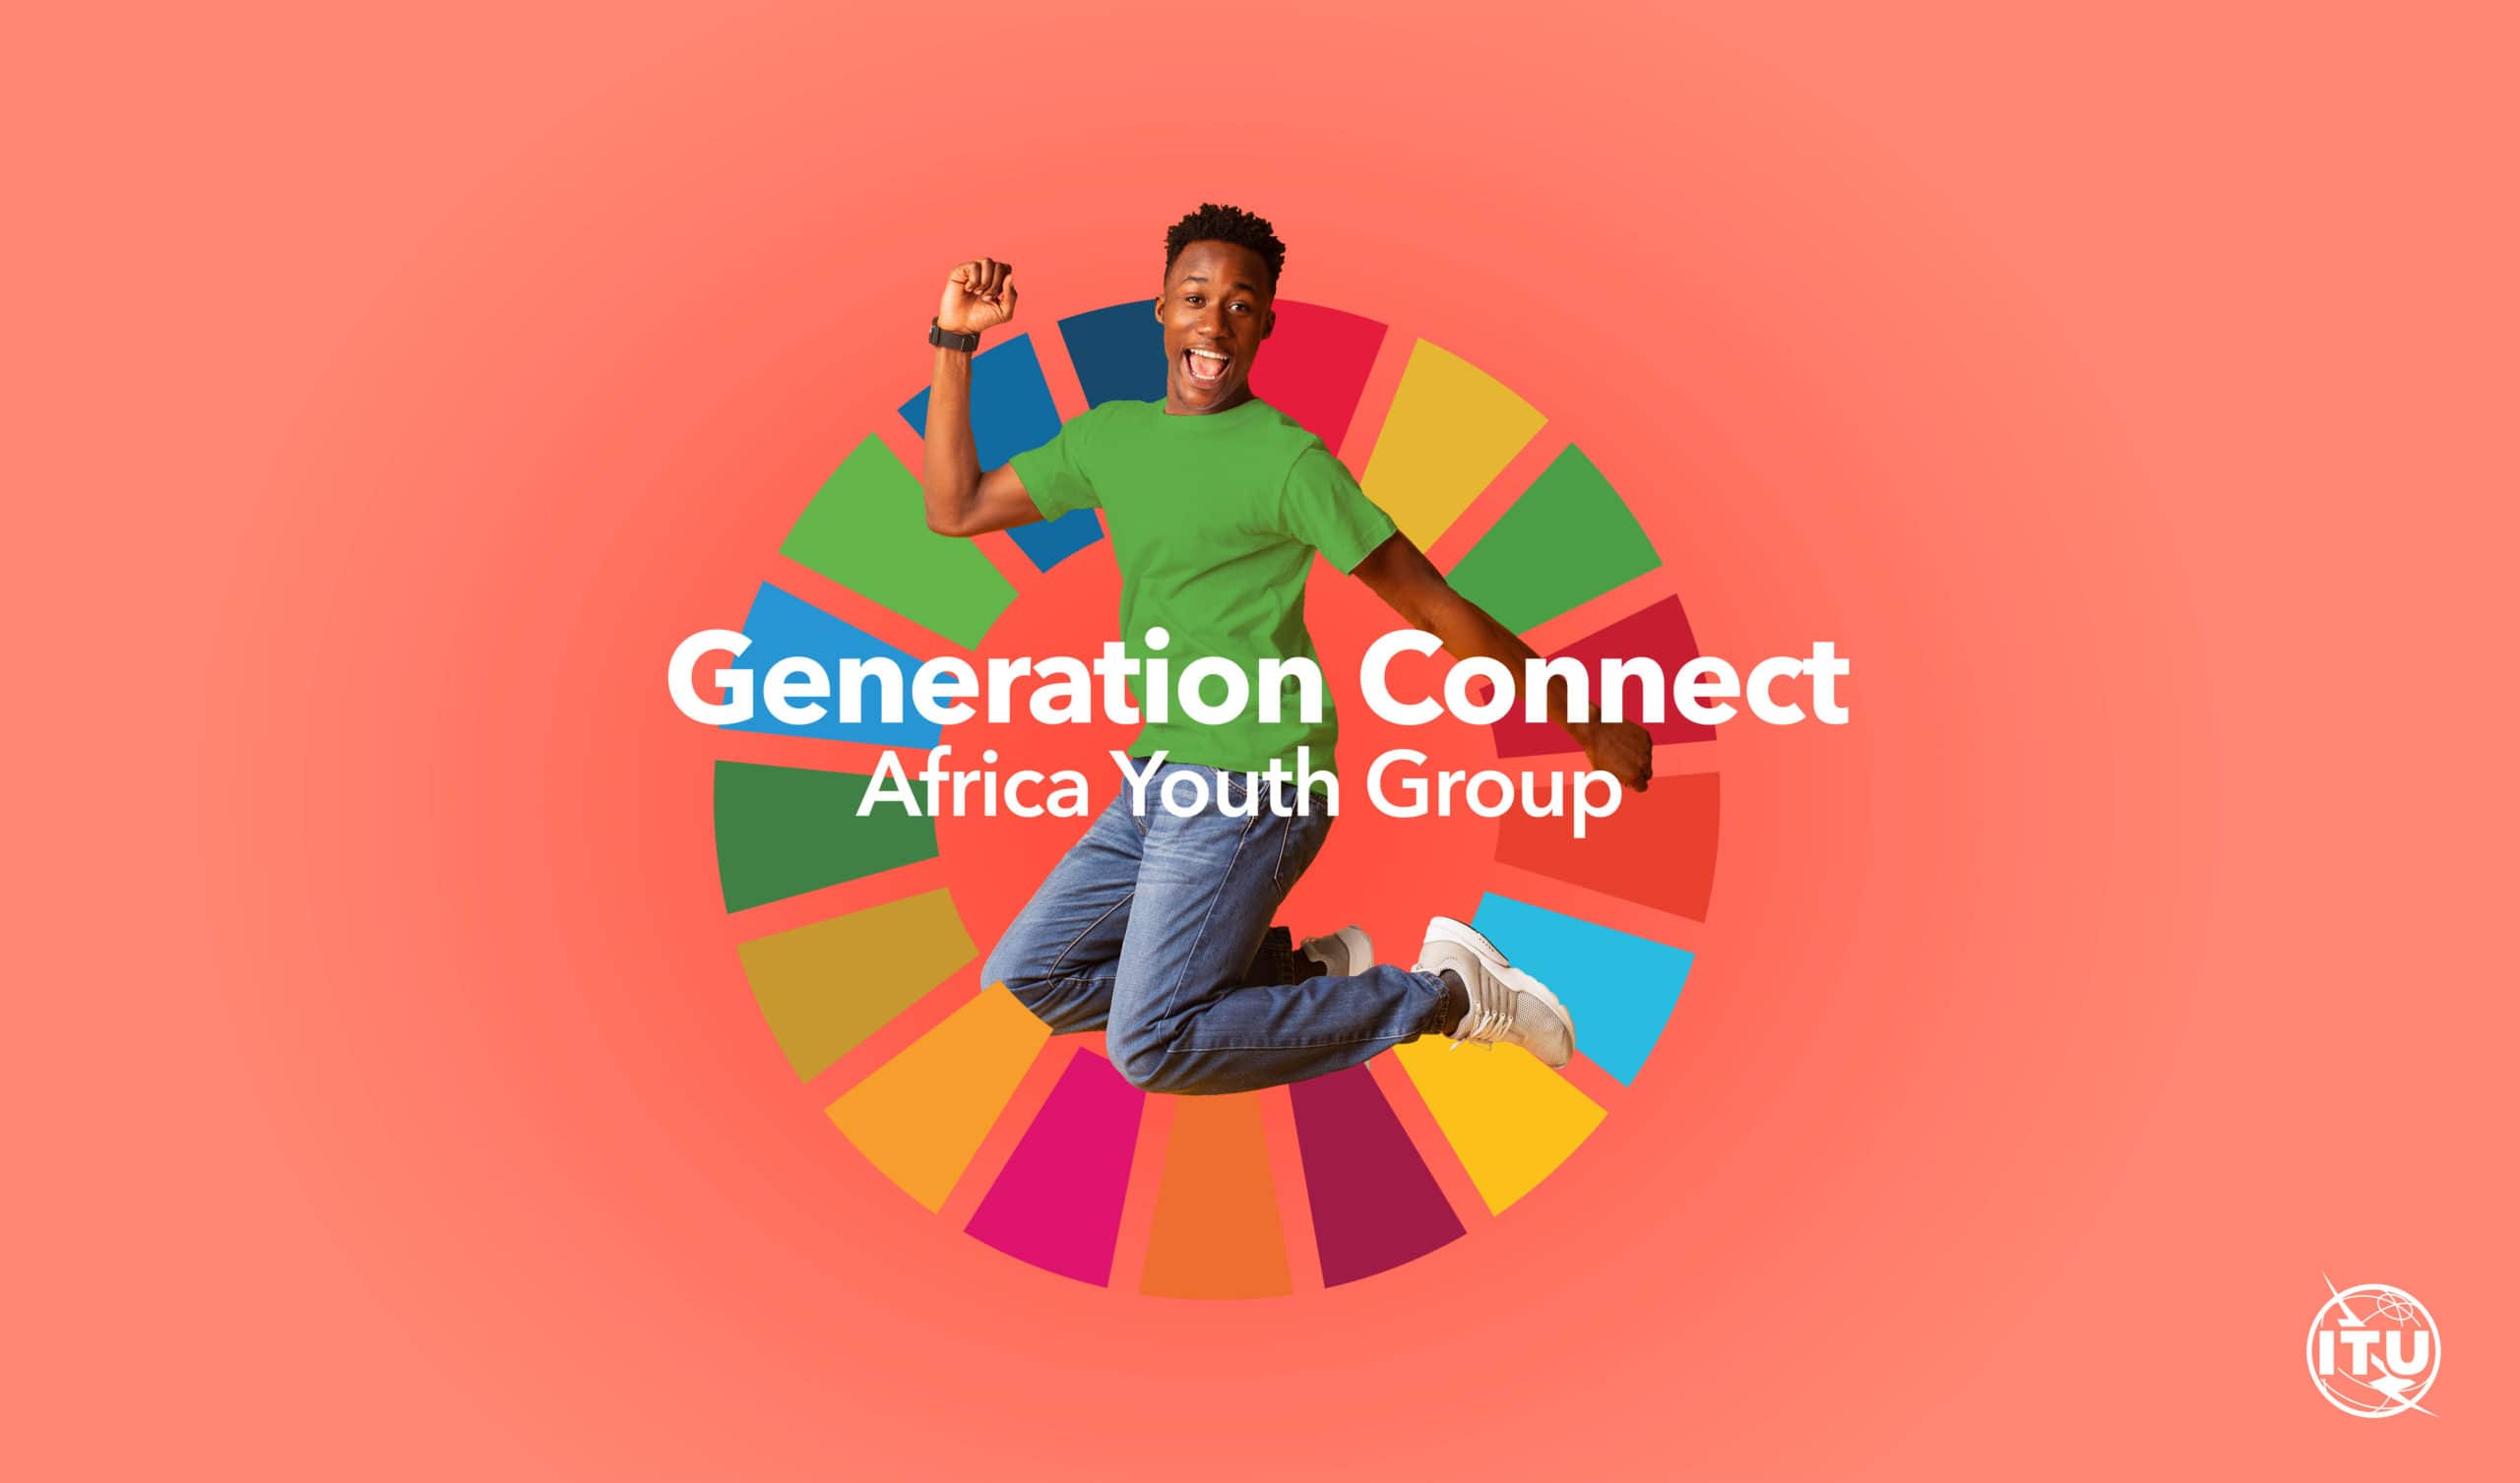 ITU Generation Connect – Africa Youth Group (GC-AFR) 2022 for Young Africans